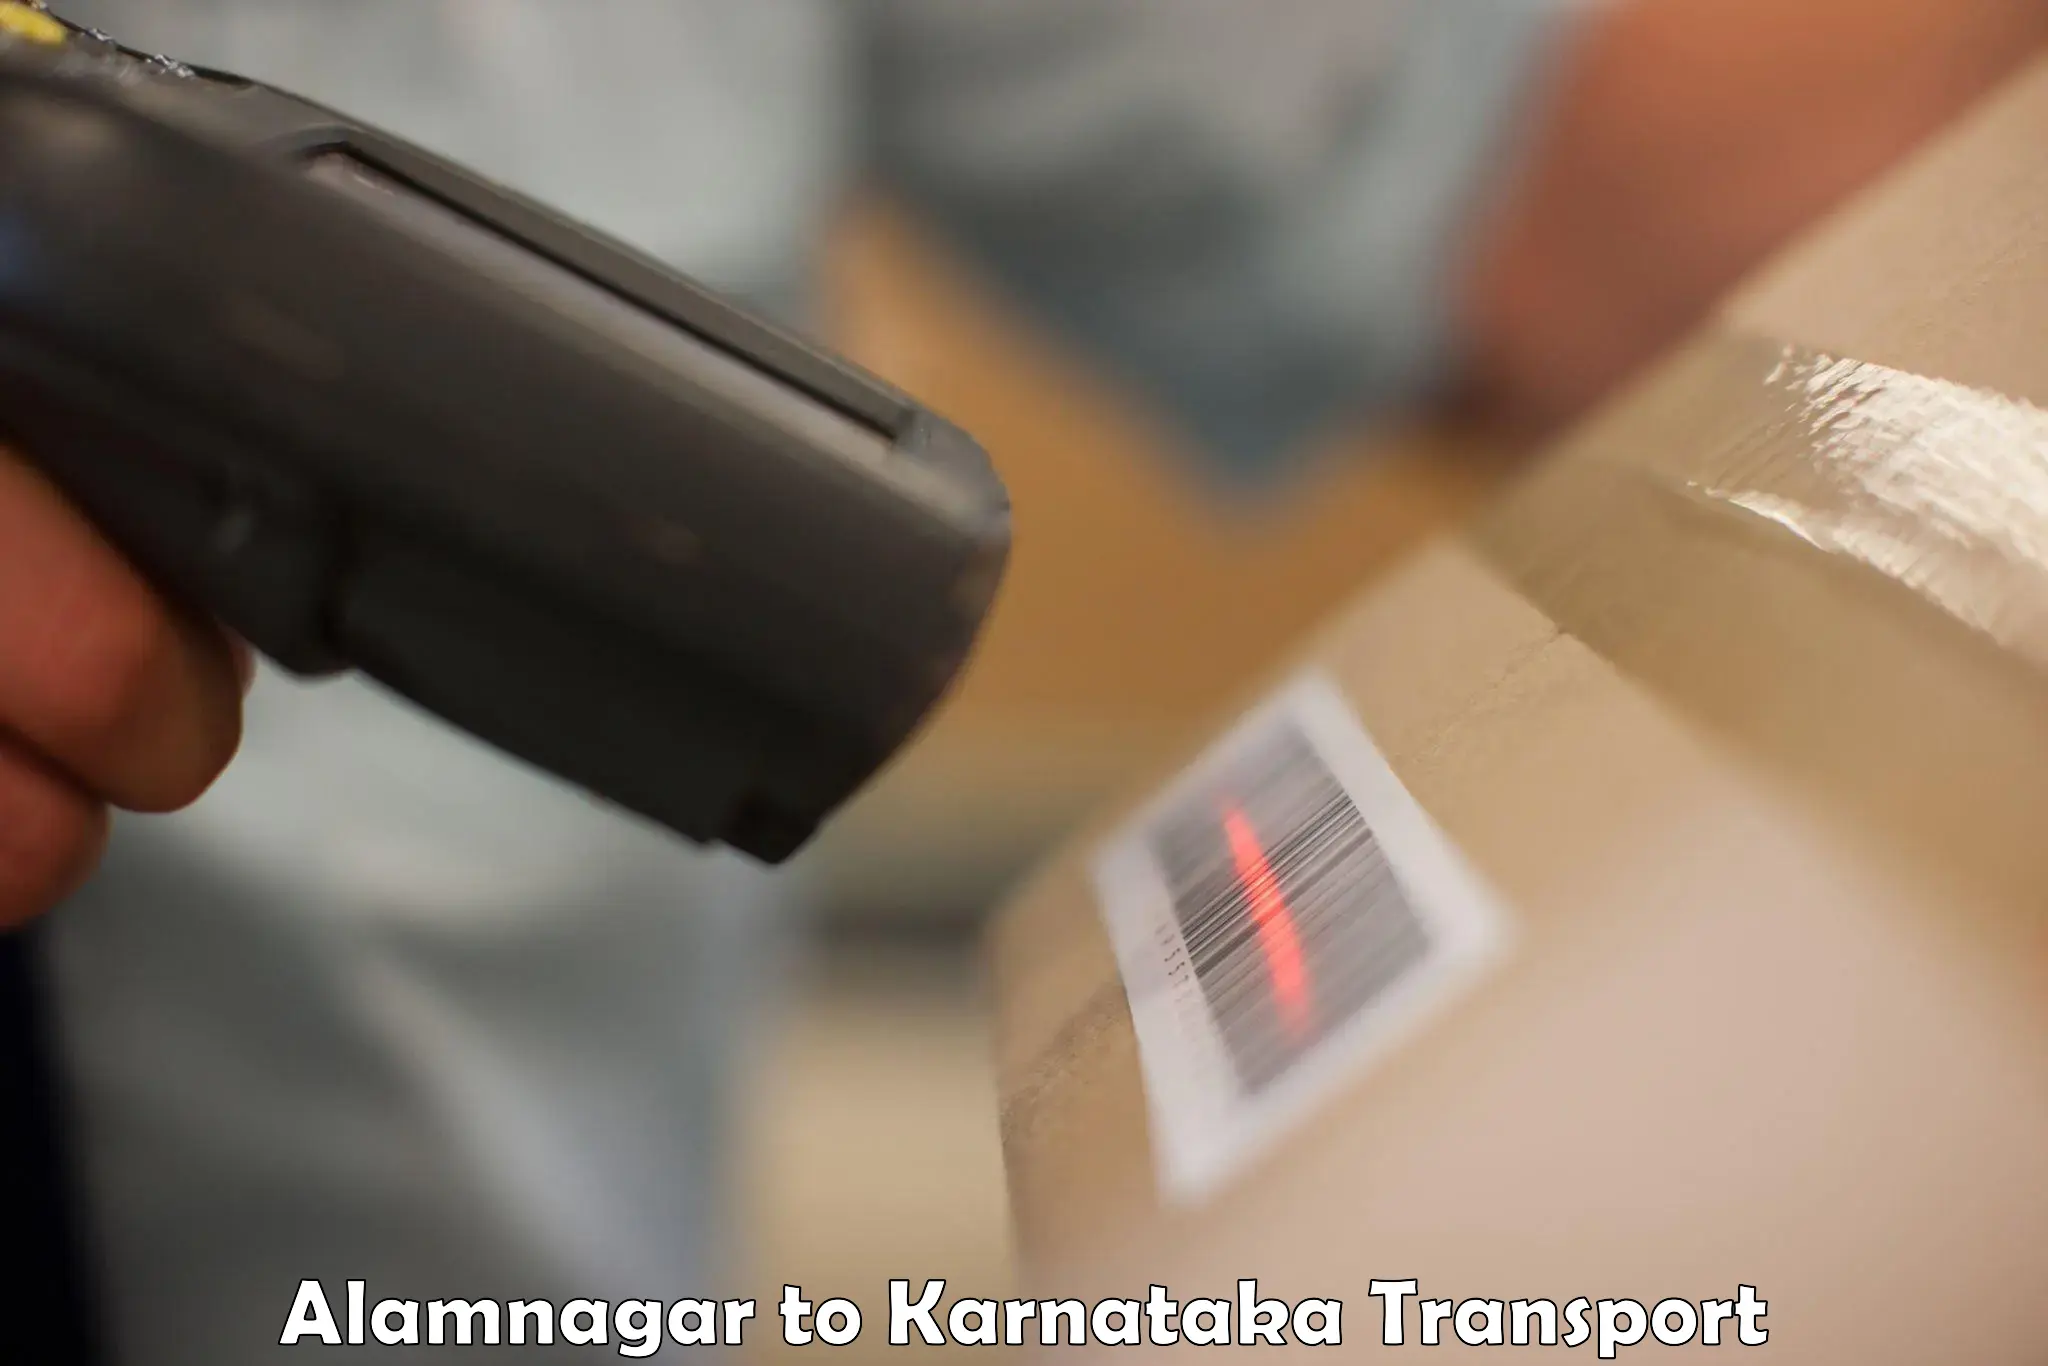 Luggage transport services in Alamnagar to Mangalore Port